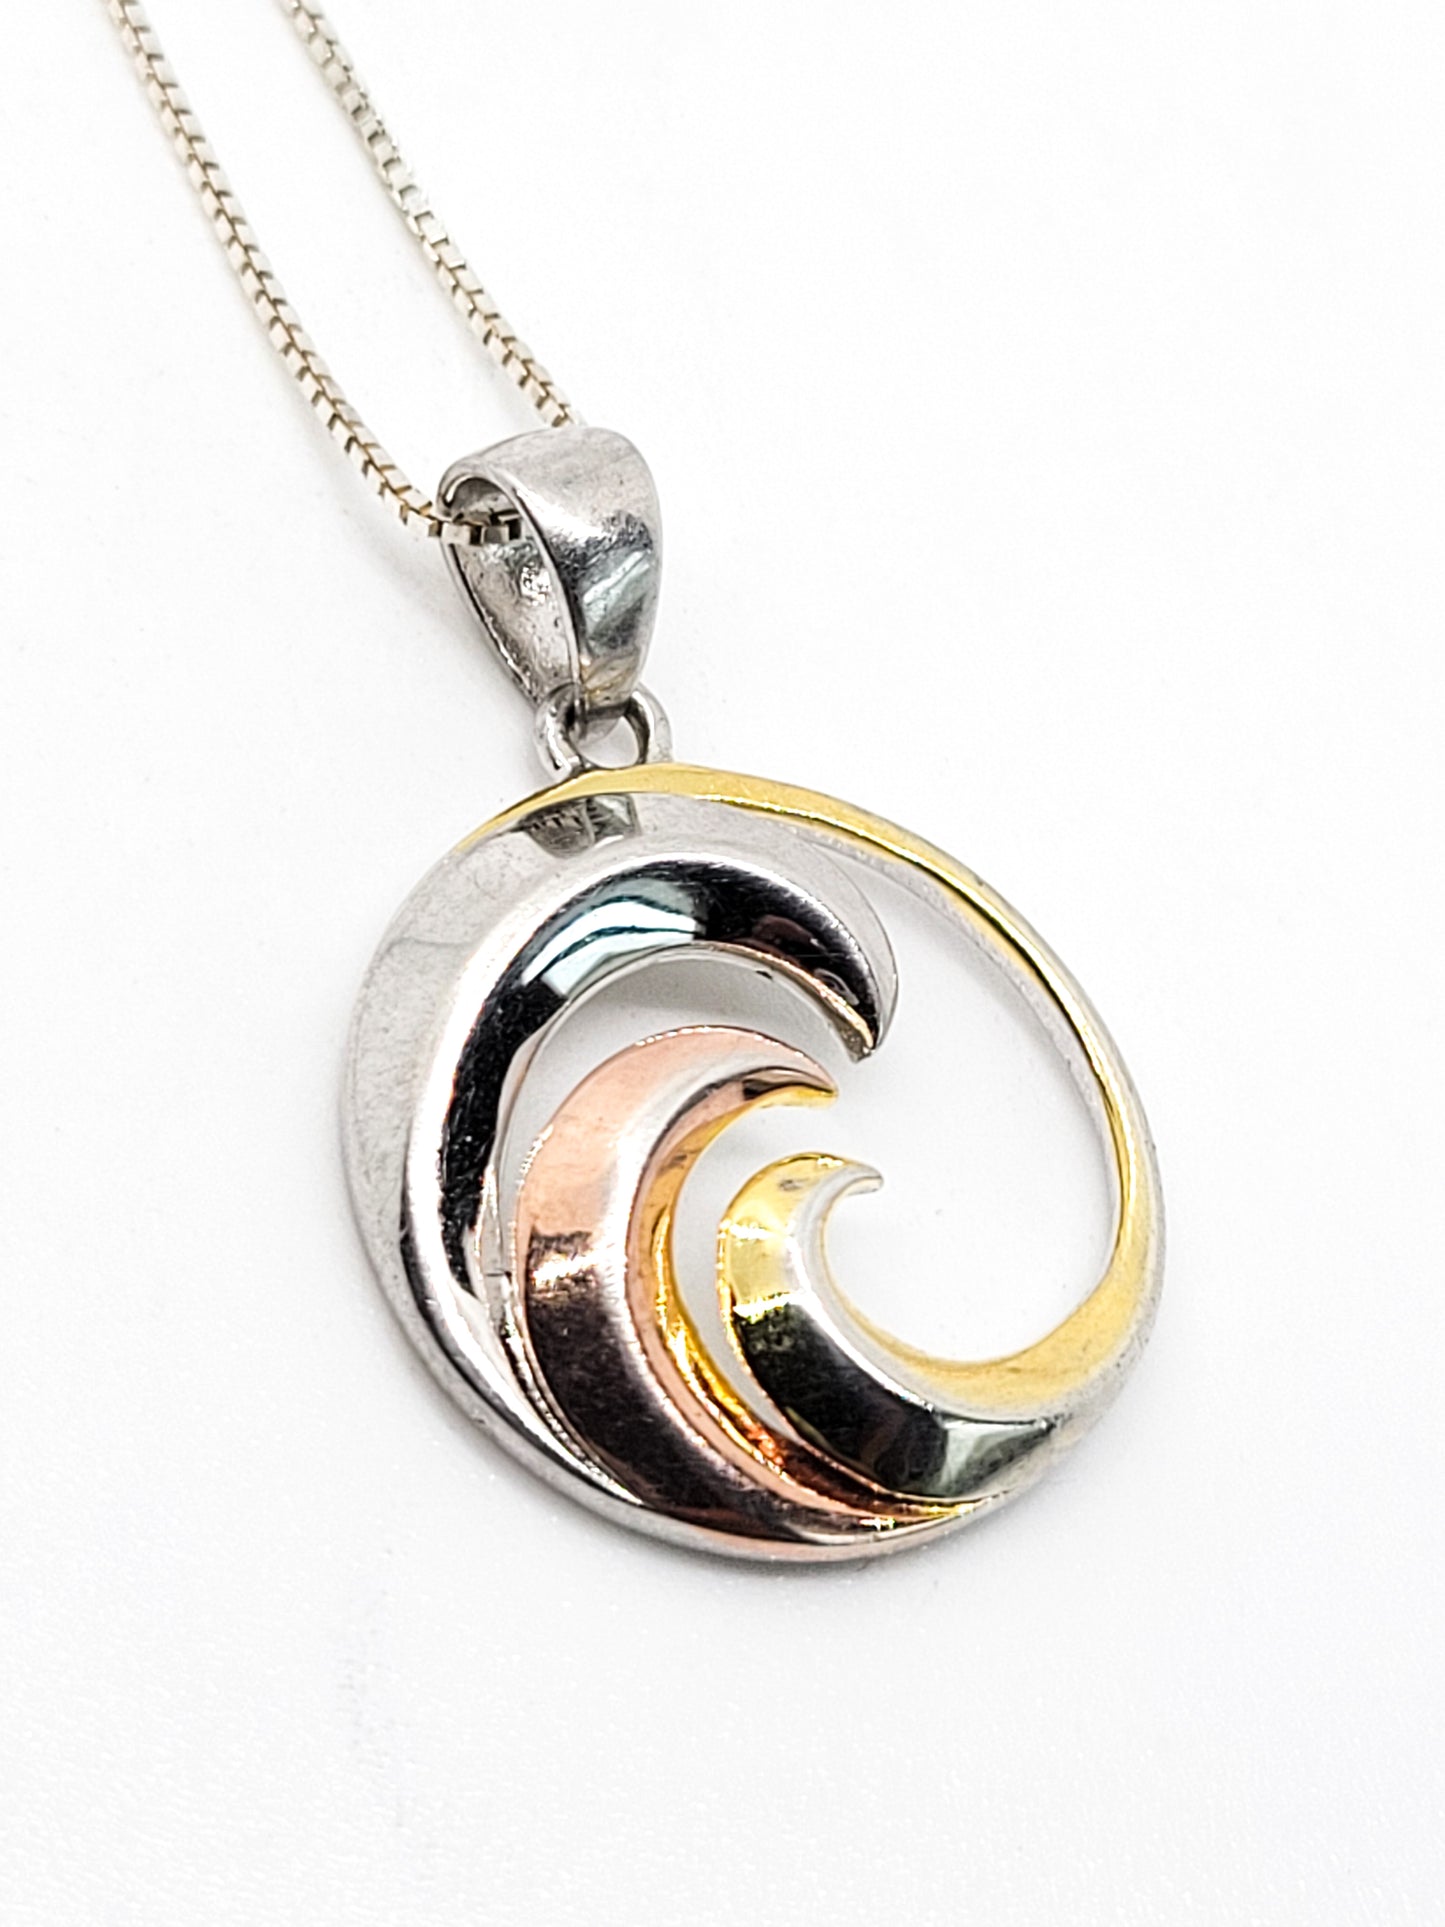 Aloha wave signed round sterling silver pendant necklace